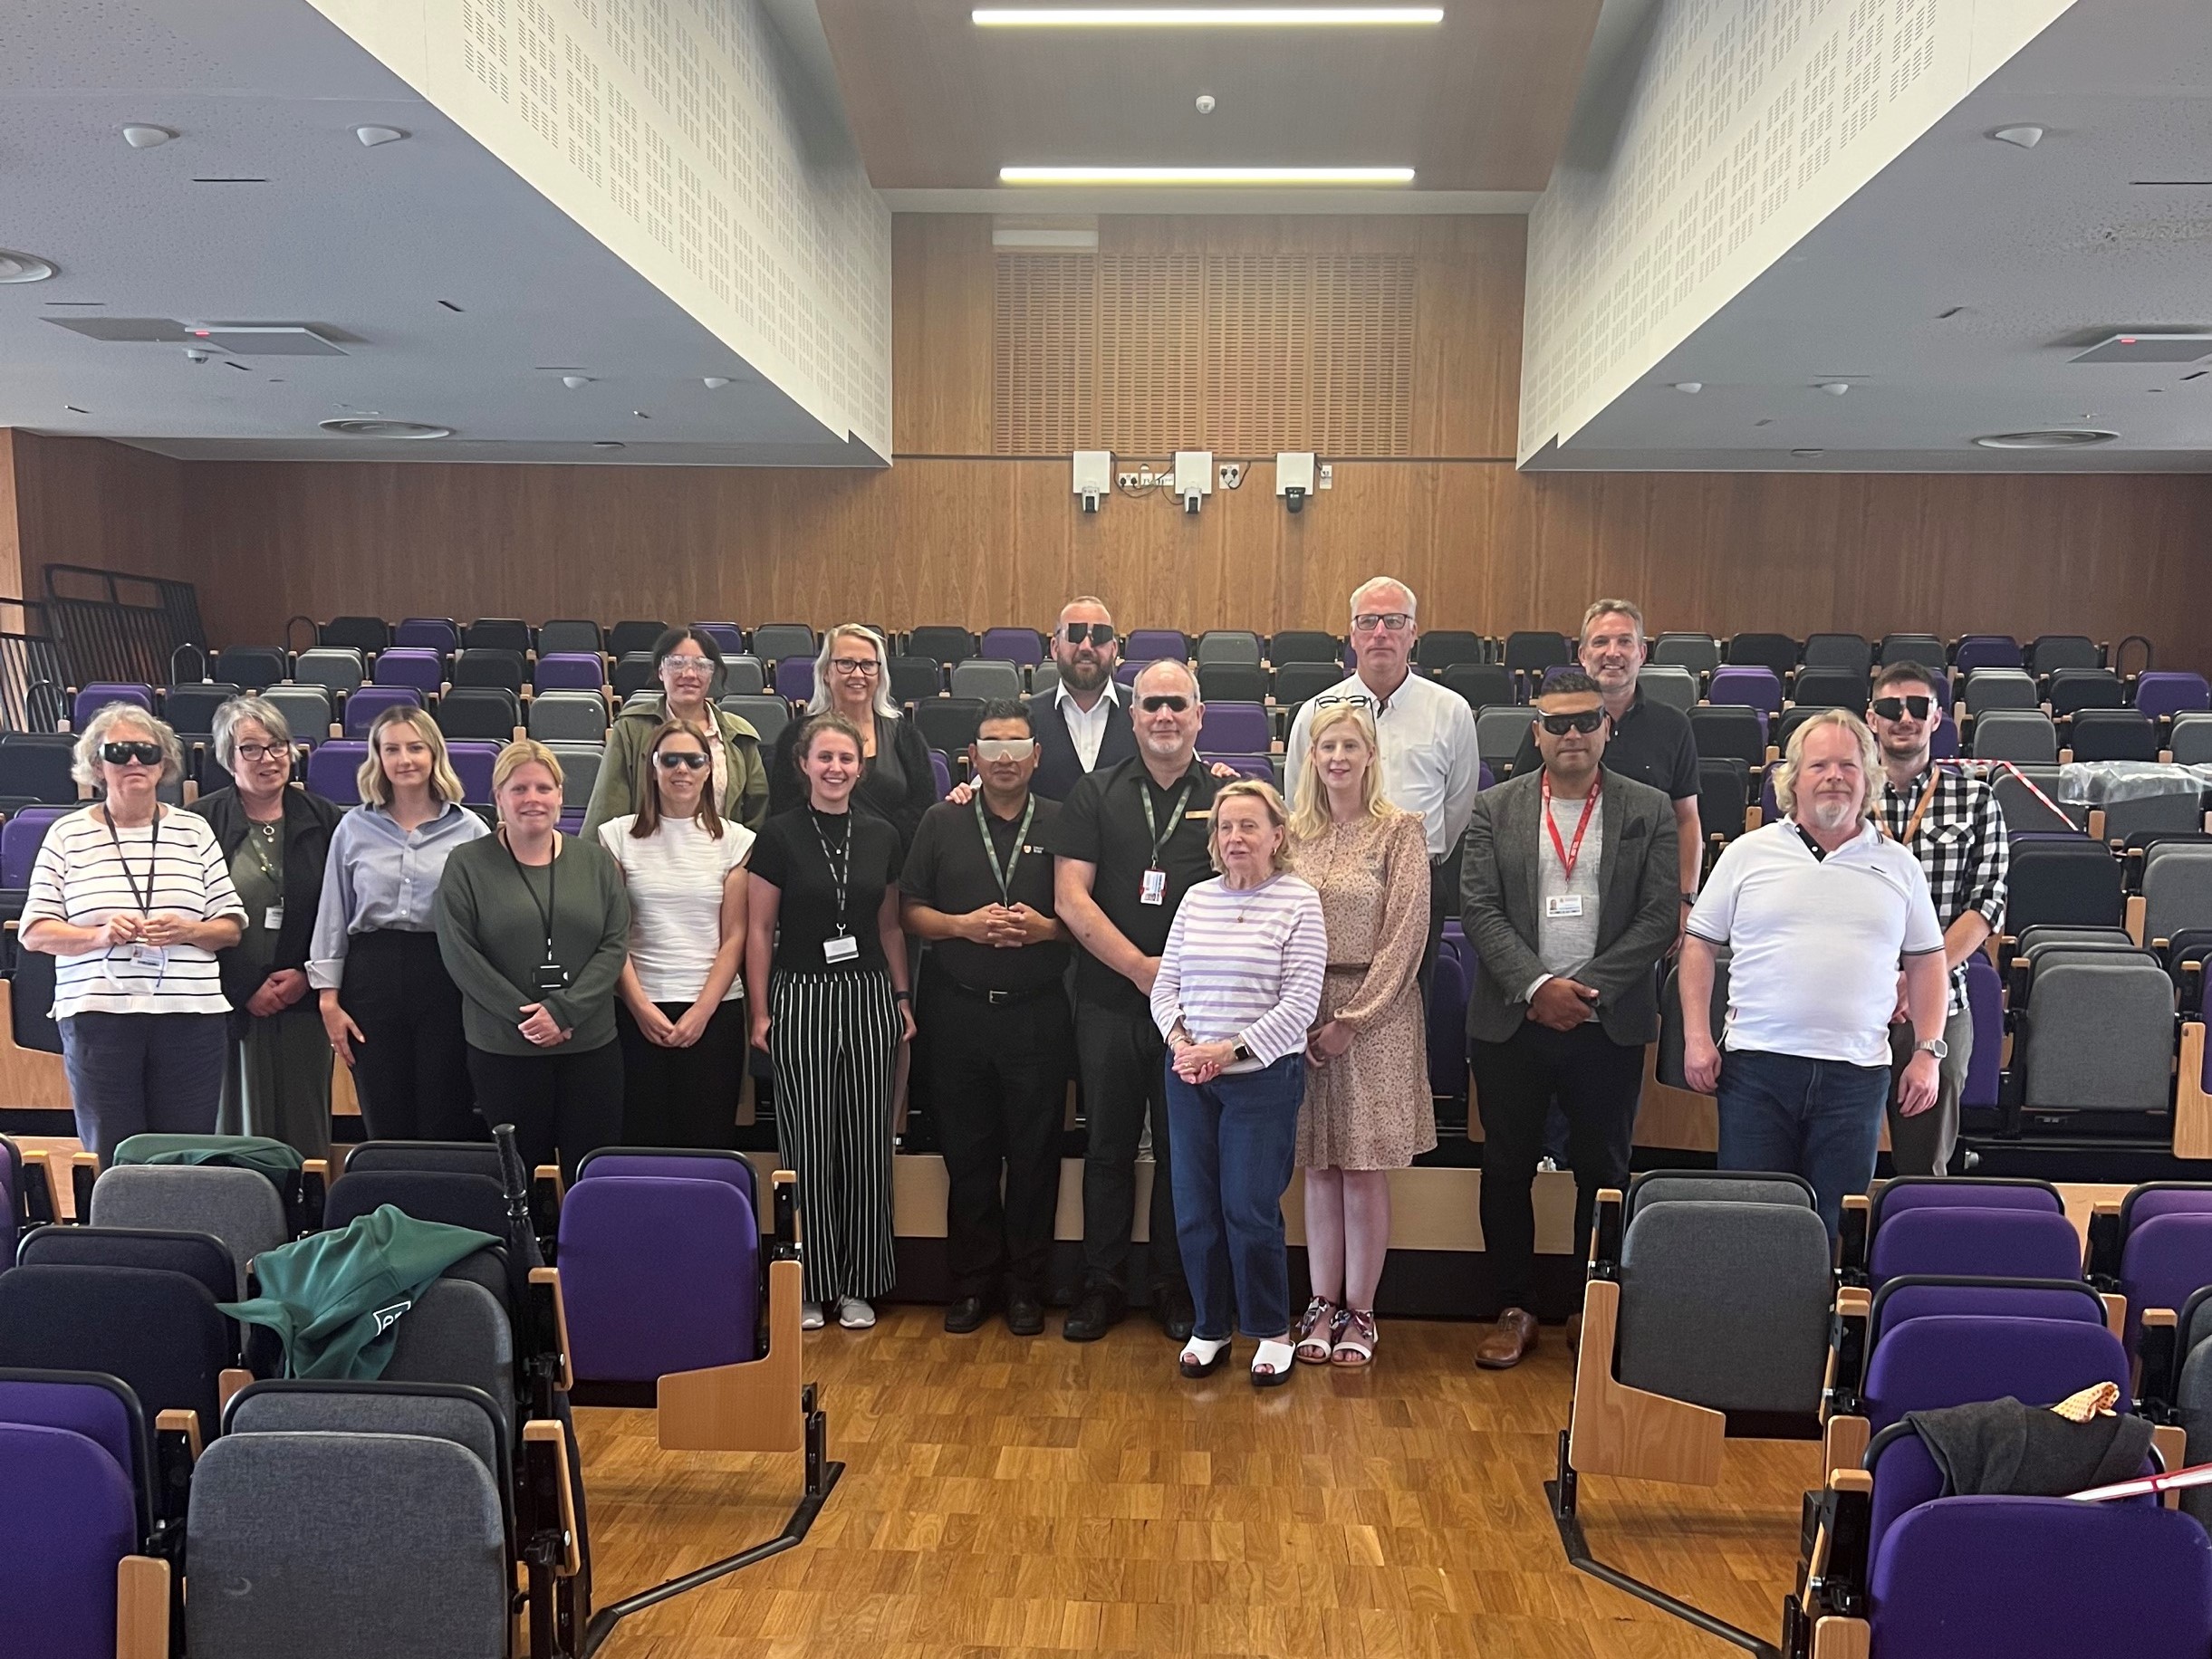 A group photo of West Midlands SLC members, Louise Connop, Martin Symcox, and University of Birmingham staff. They are all stood together , looking at the camera.